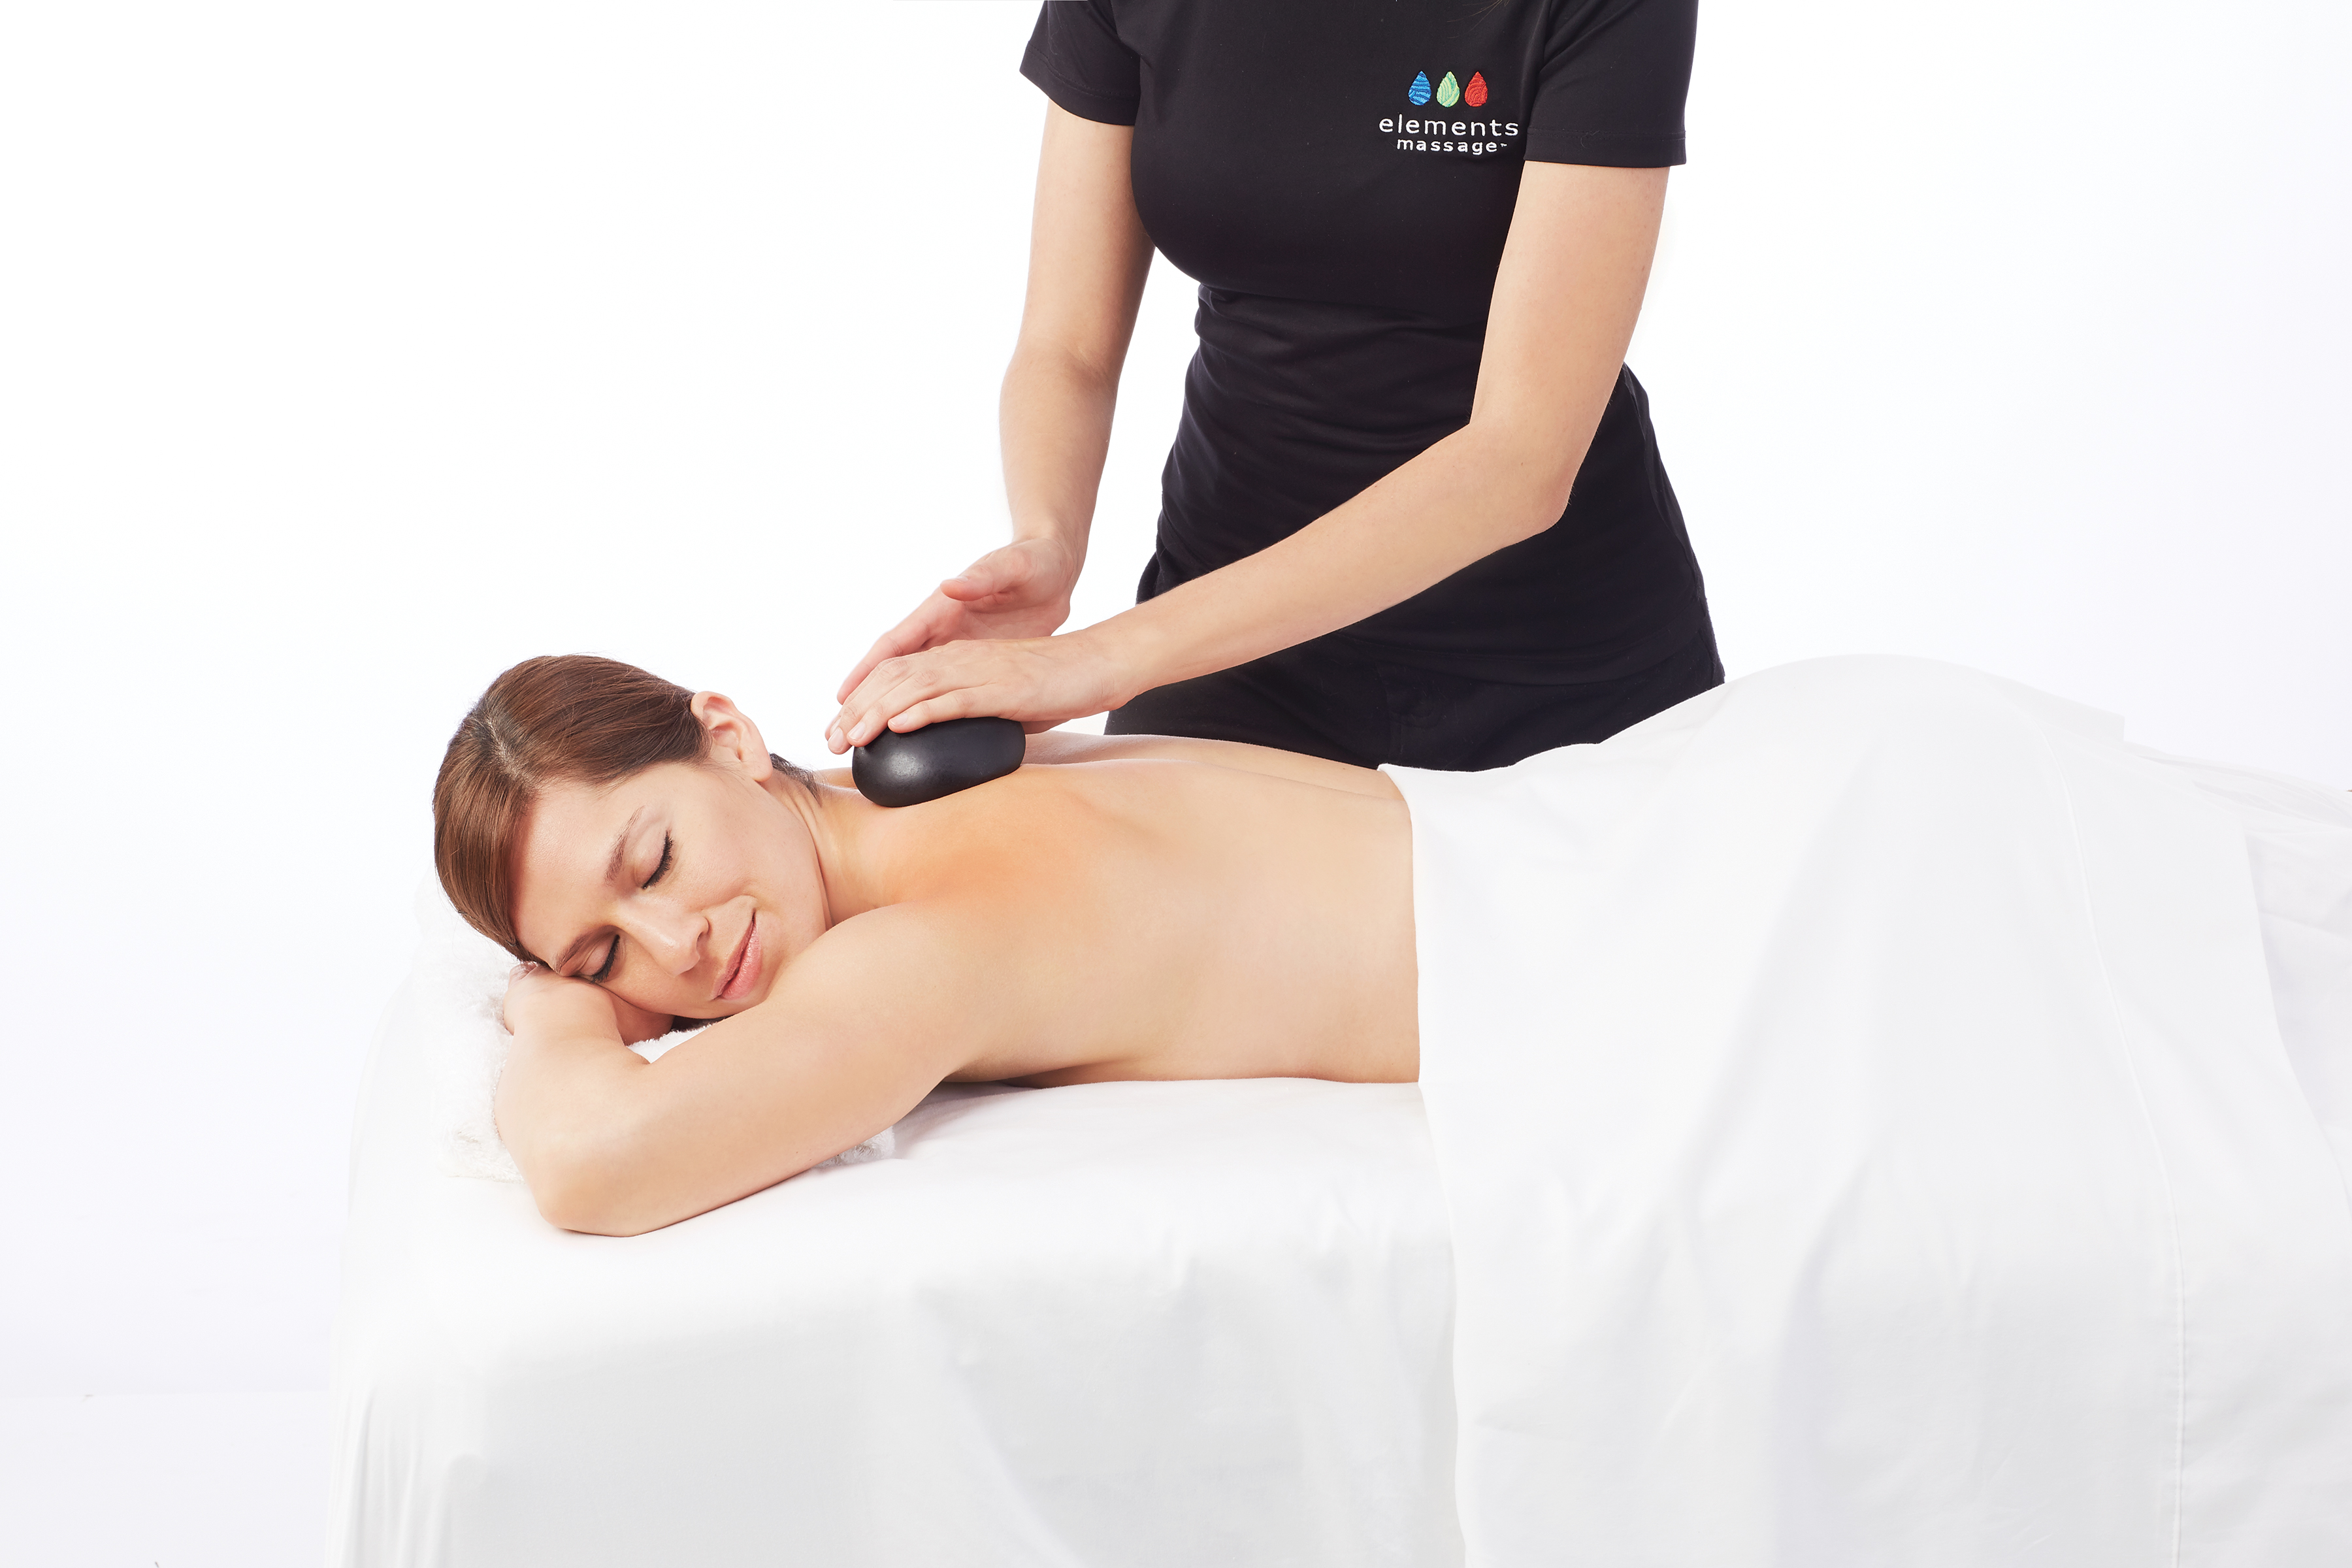 Elements Massage suggests implementing hot stones into your regular massage therapy s...